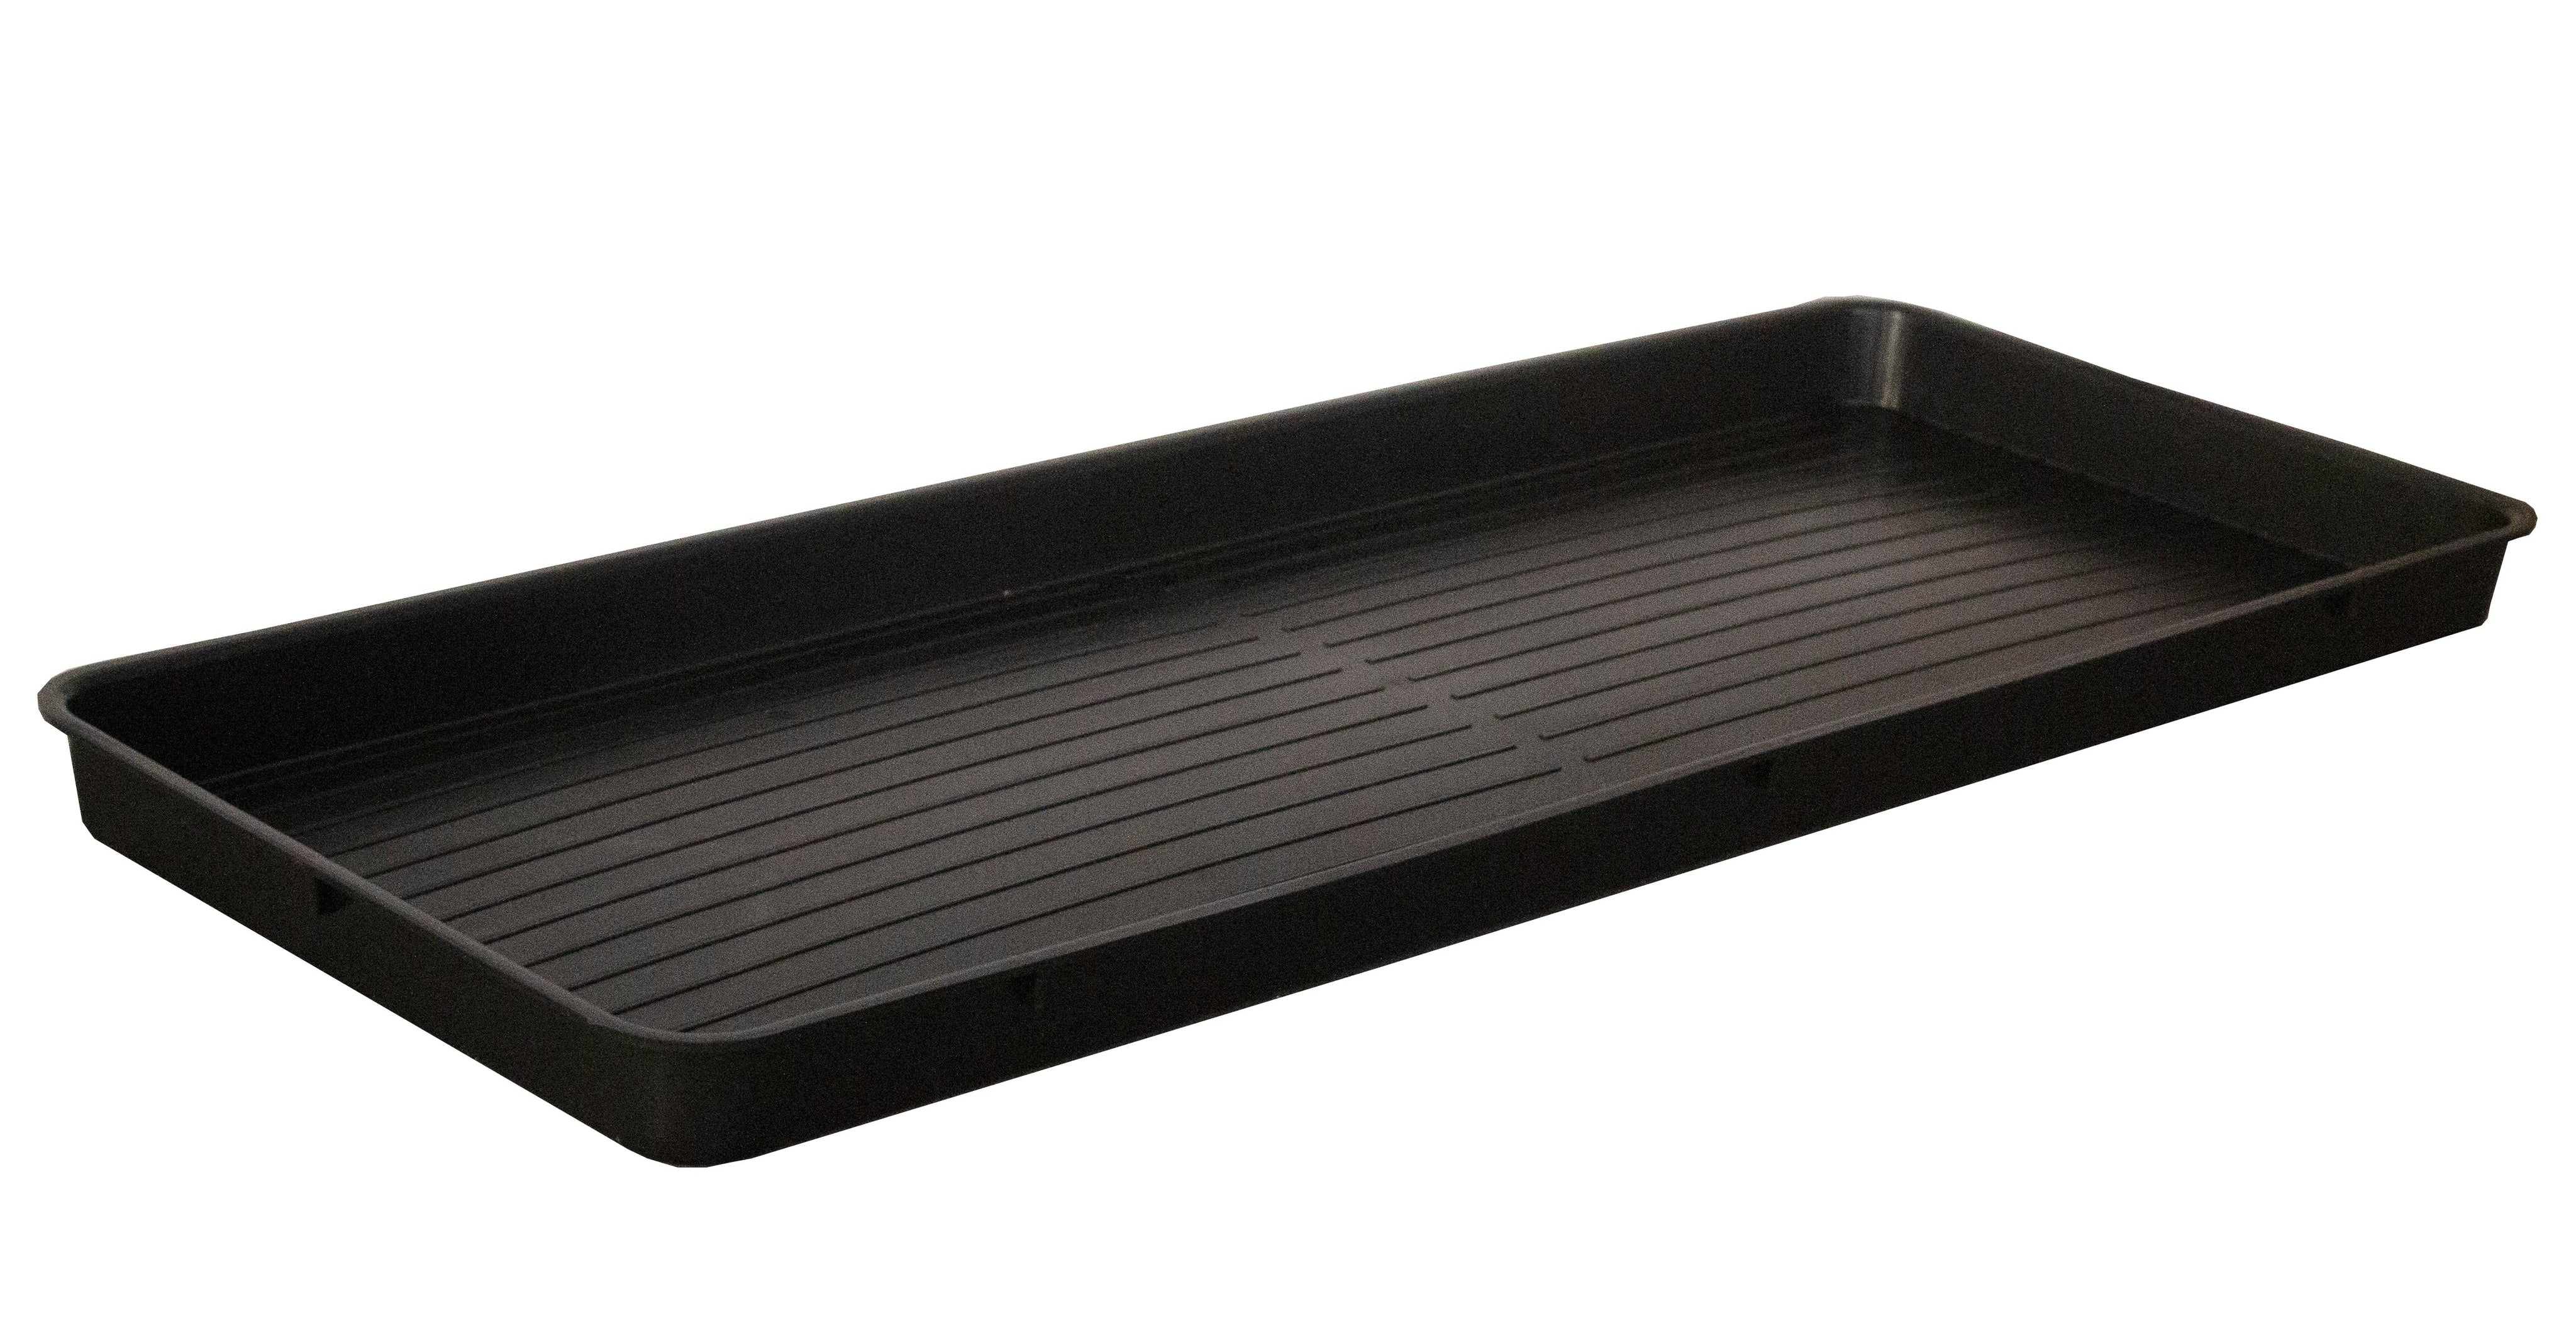 15 Litre Drip Tray with Ribbed Profile Sump - TT152 Spill Tray Spill Tray > Drip Tray > Spill Containment > Spill Control > Romold > One Stop For Safety   